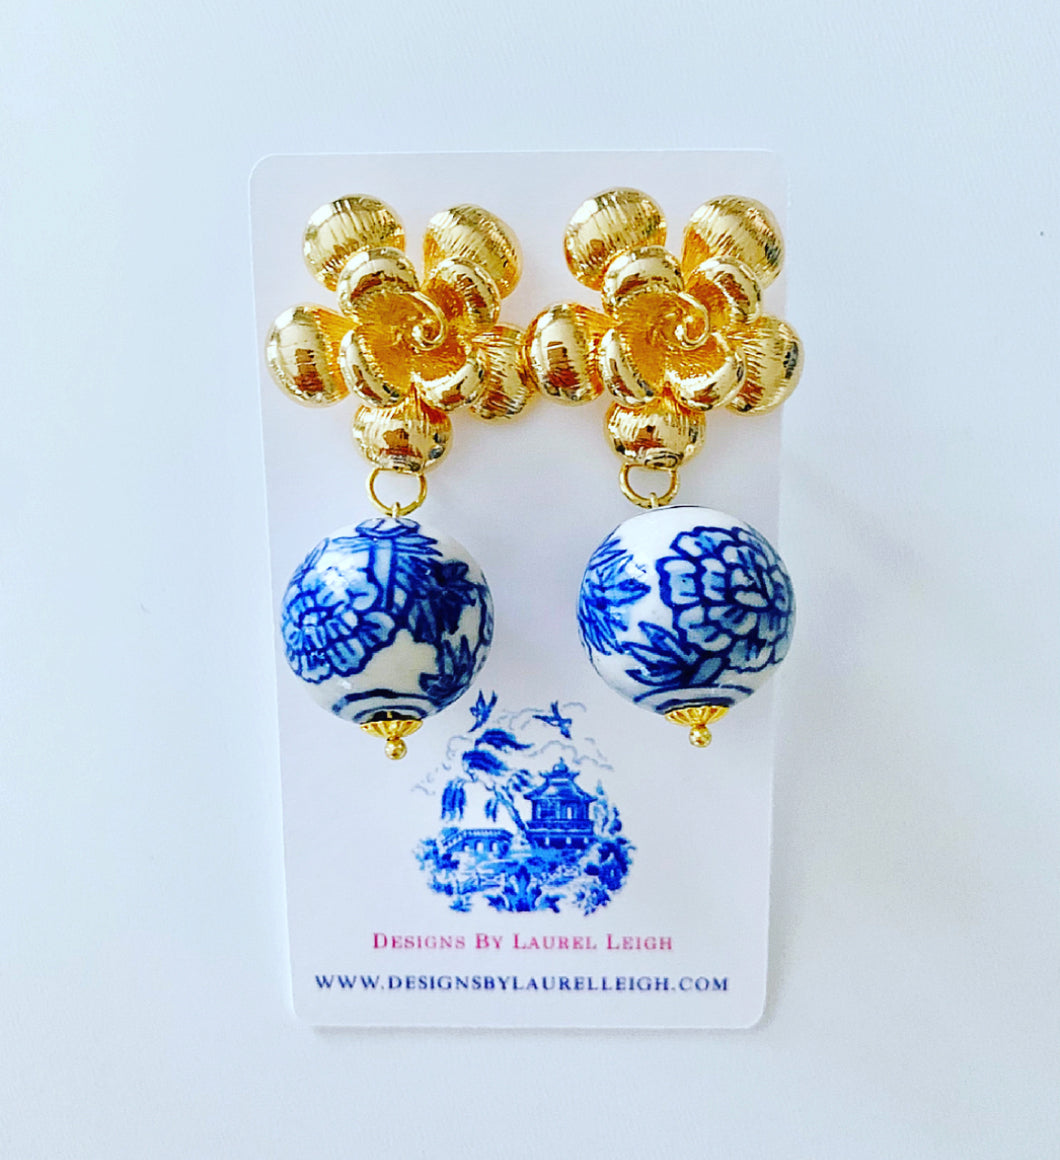 Blue and White Chinoiserie Peony Earrings - Ginger jar